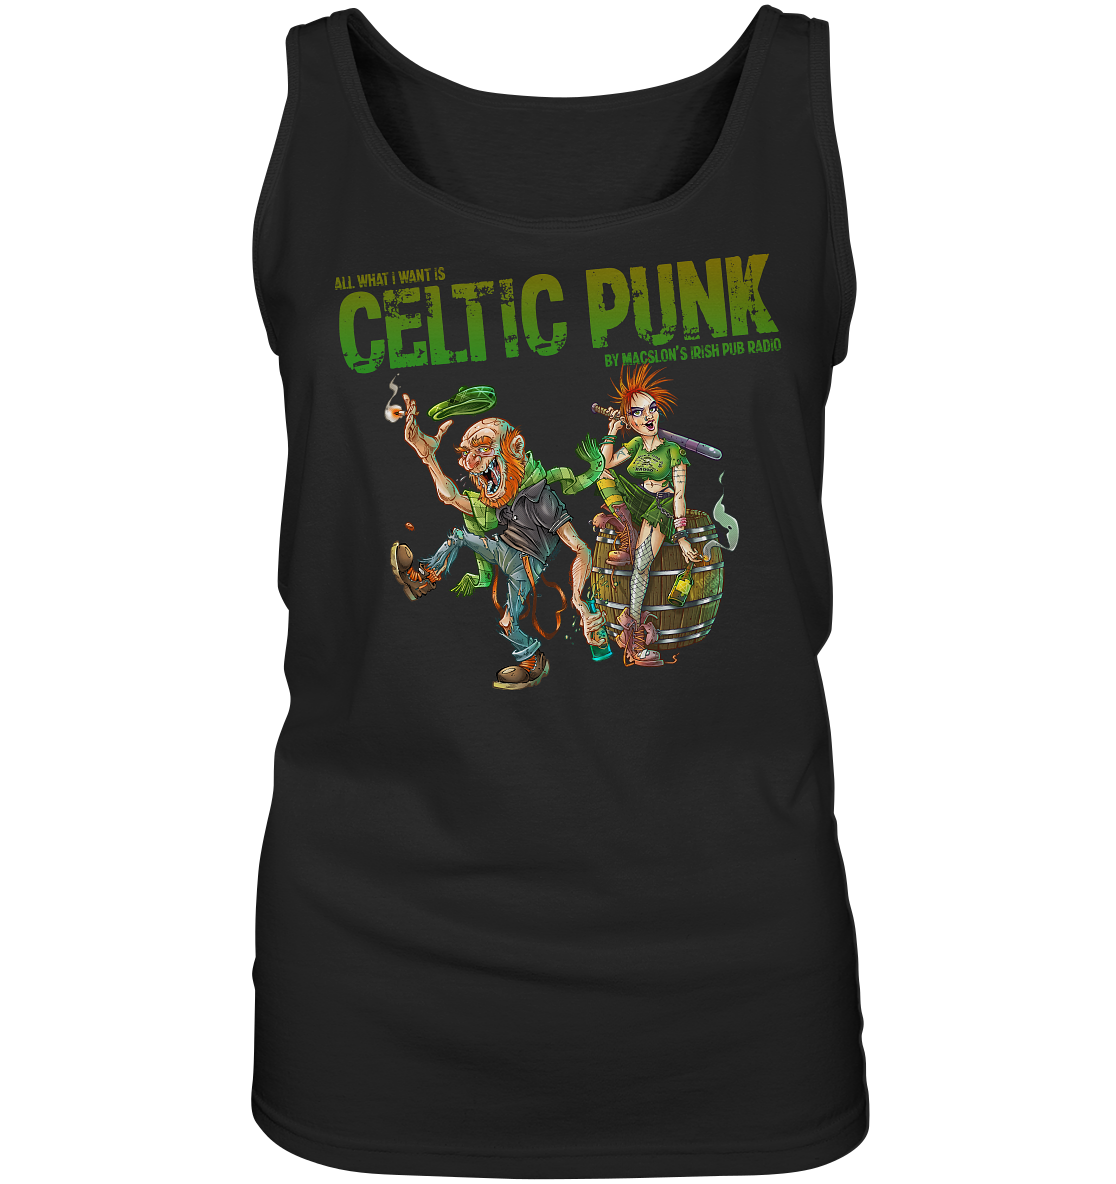 All What I Want Is "Celtic Punk" - Ladies Tank-Top